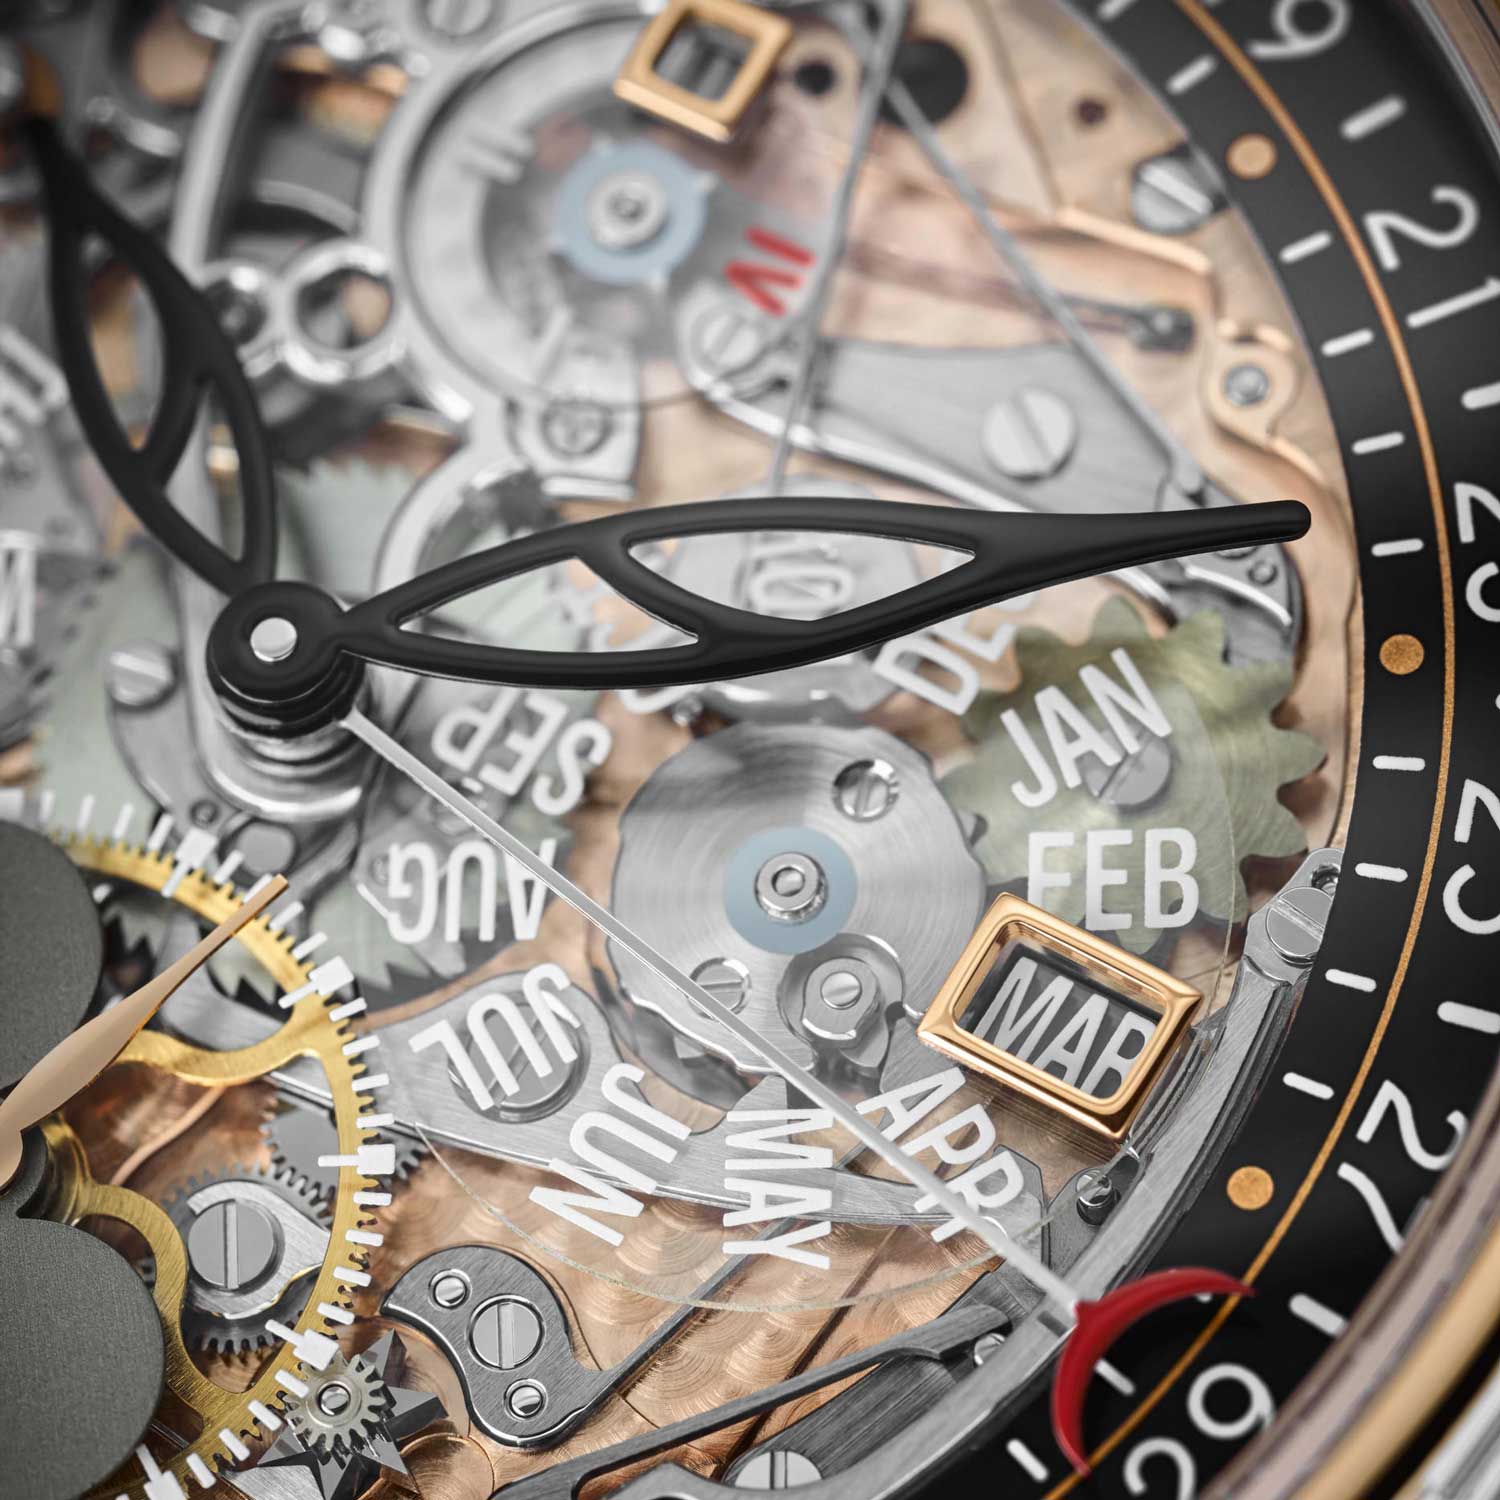 The retrograde perpetual calendar complication is a miracle of both engineering and transparency.